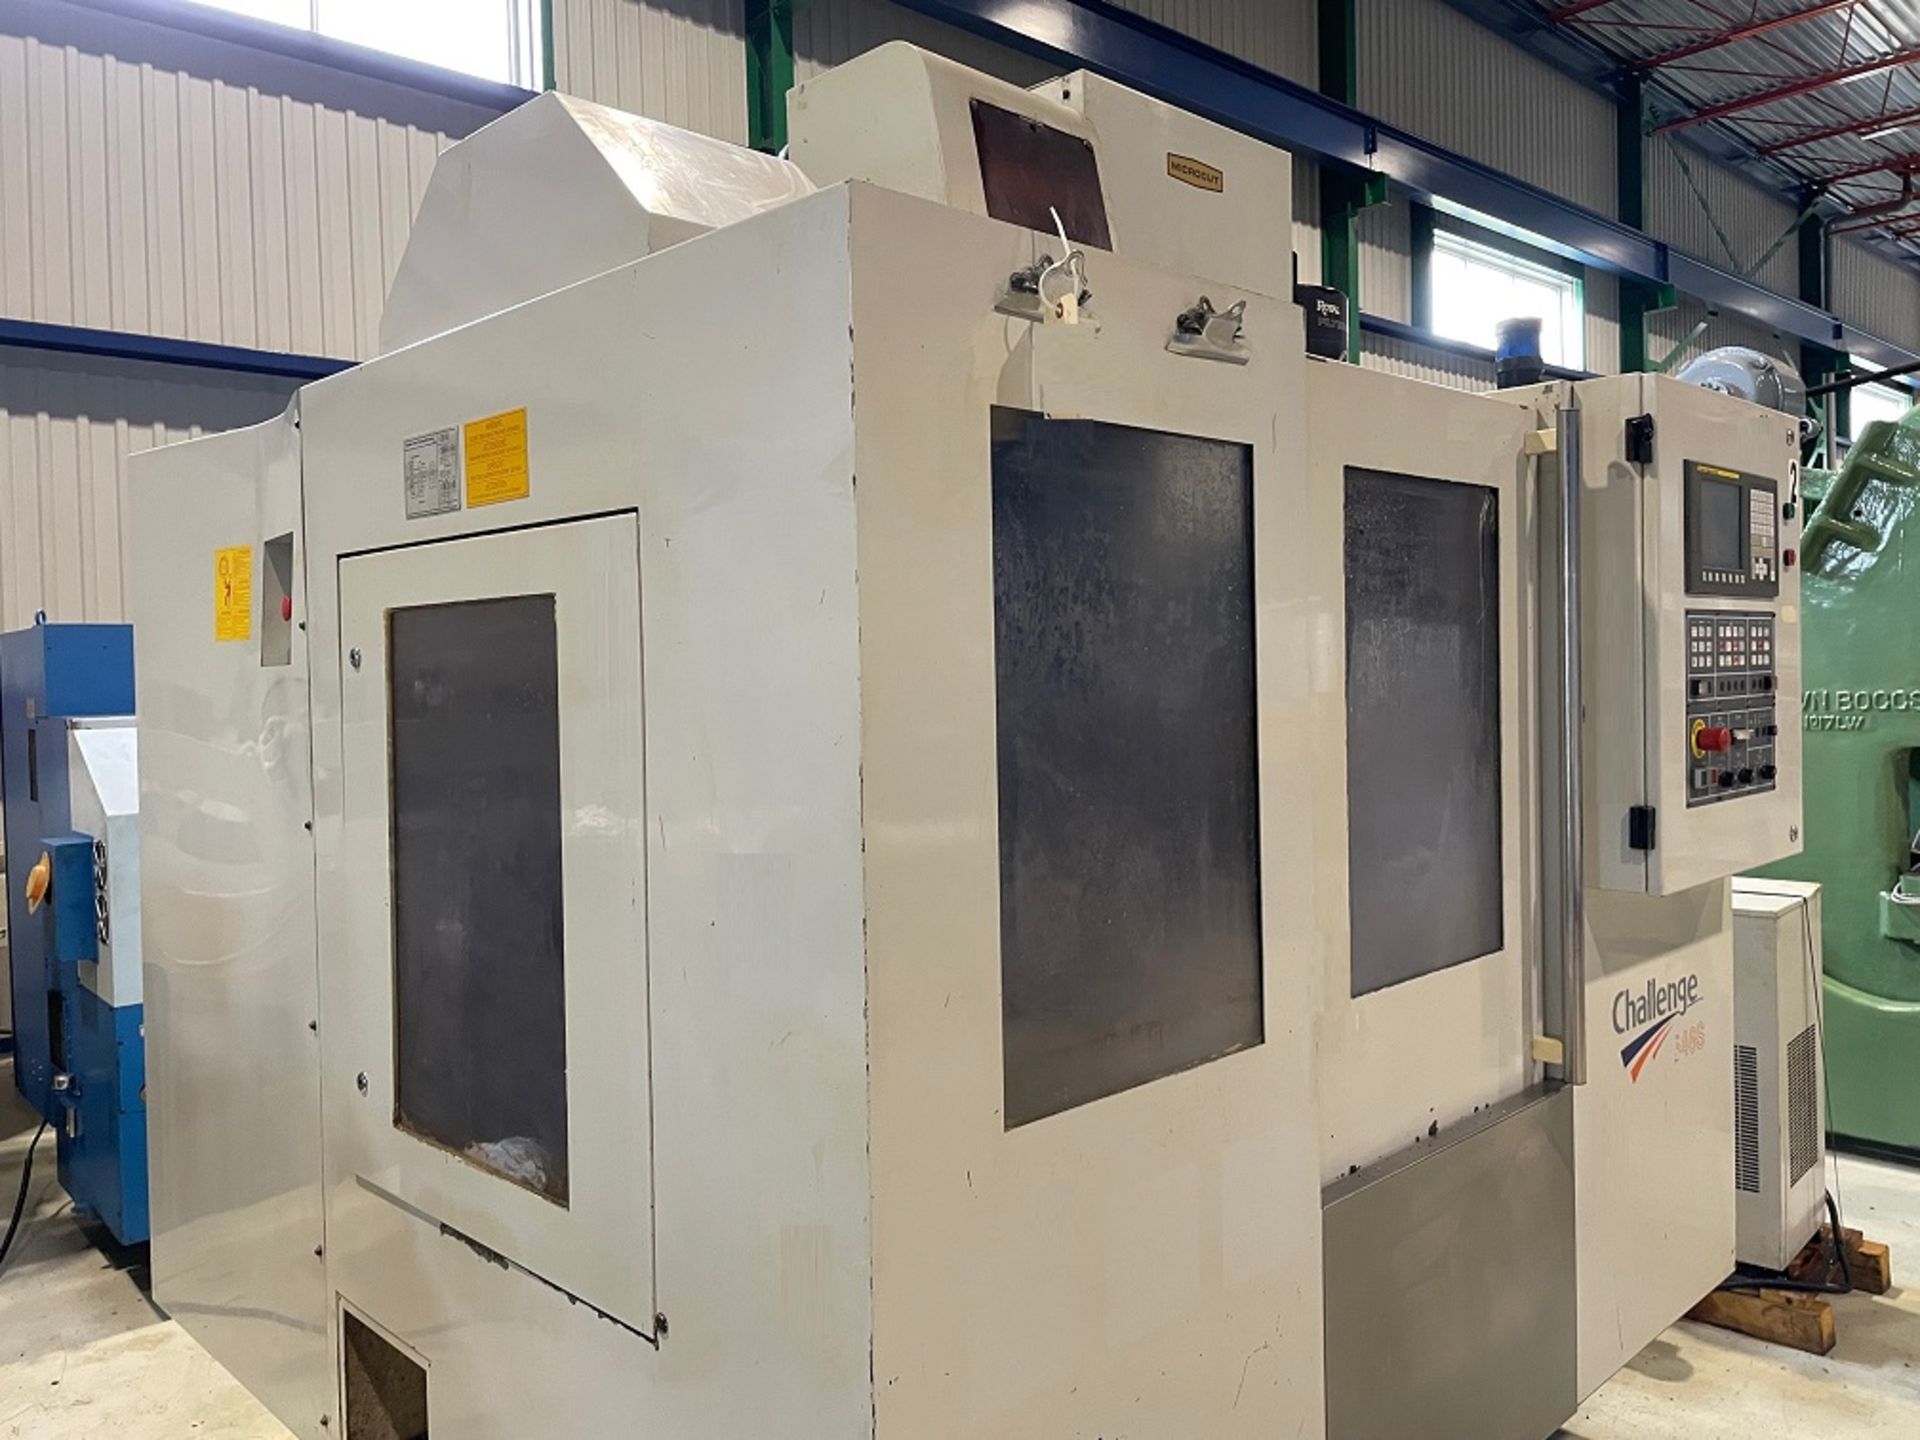 2007 MICROCUT CHALLENGER MCV646S / VERTICAL MACHINE CENTER / SN: 072326054 / TABLE SIZE: 17.75" X - Image 3 of 9